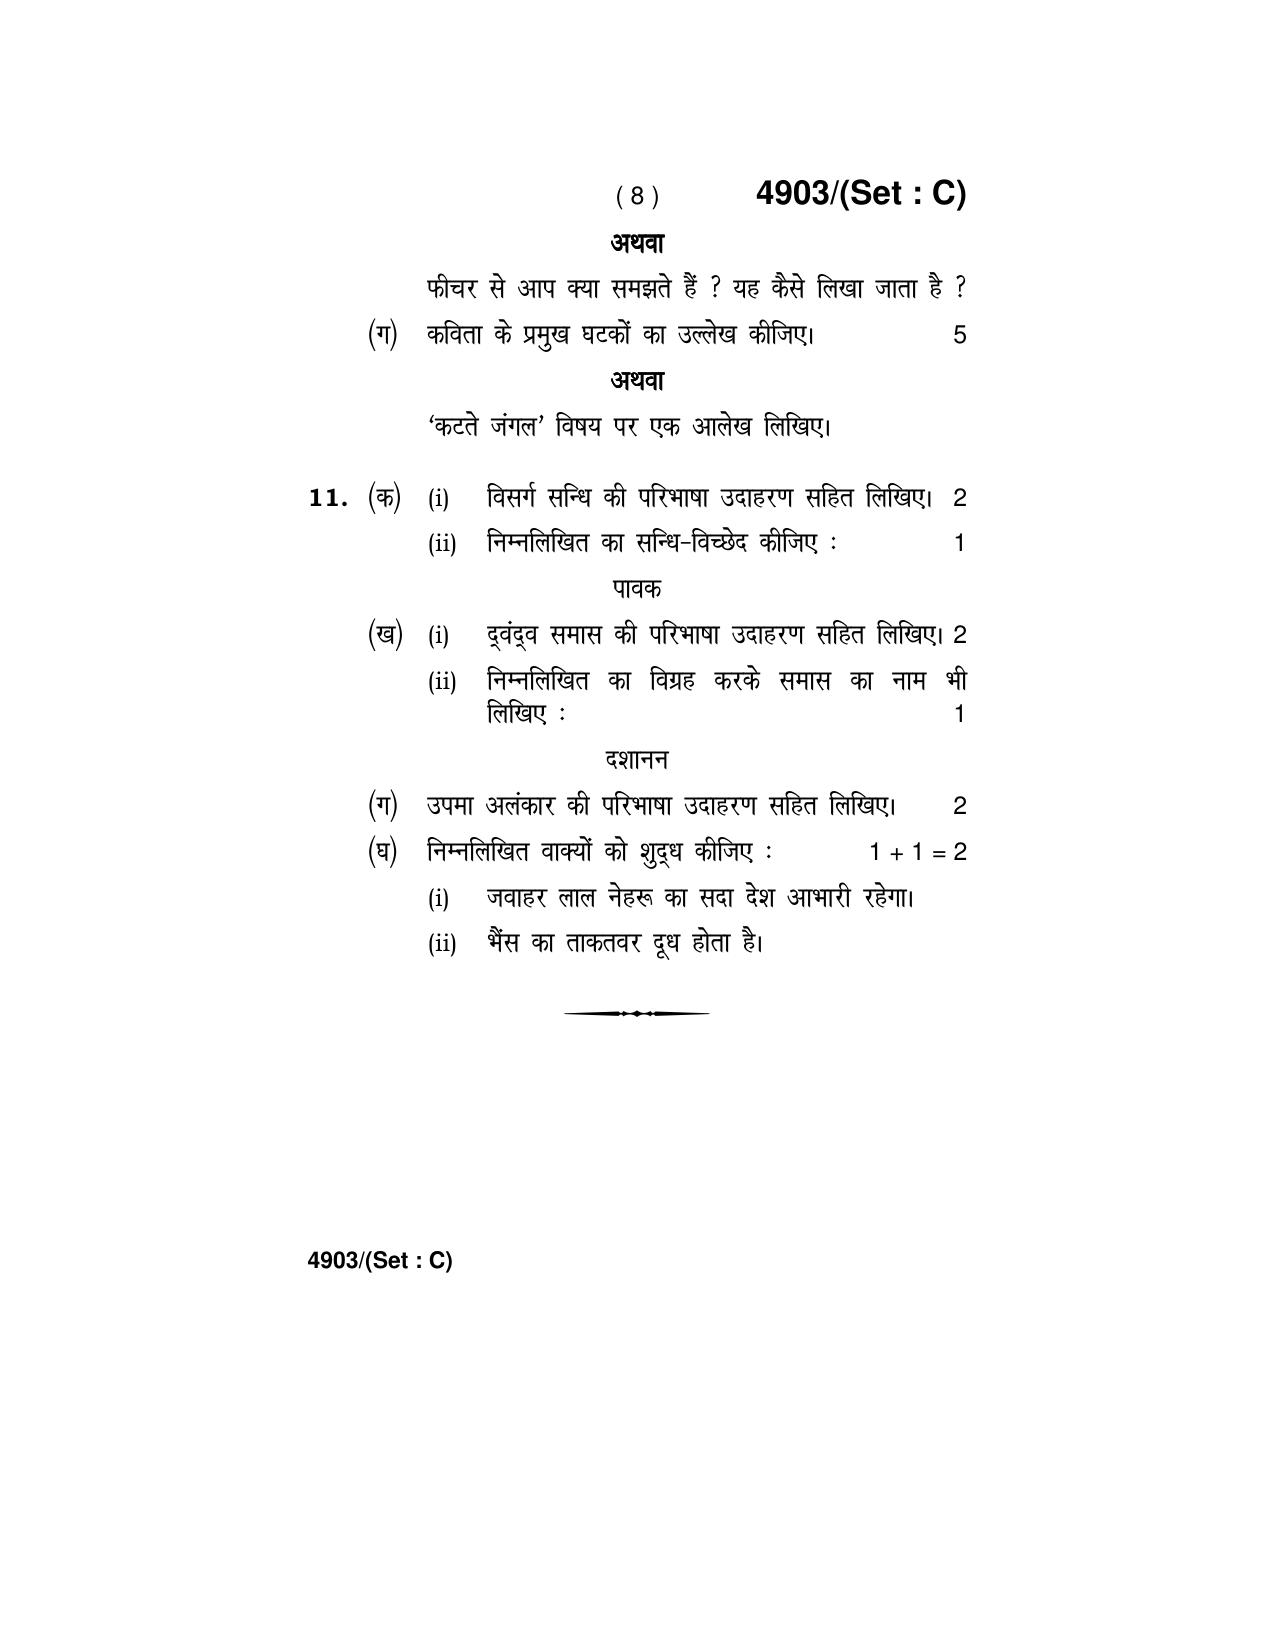 Haryana Board HBSE Class 12 Hindi Core 2020 Question Paper - Page 24